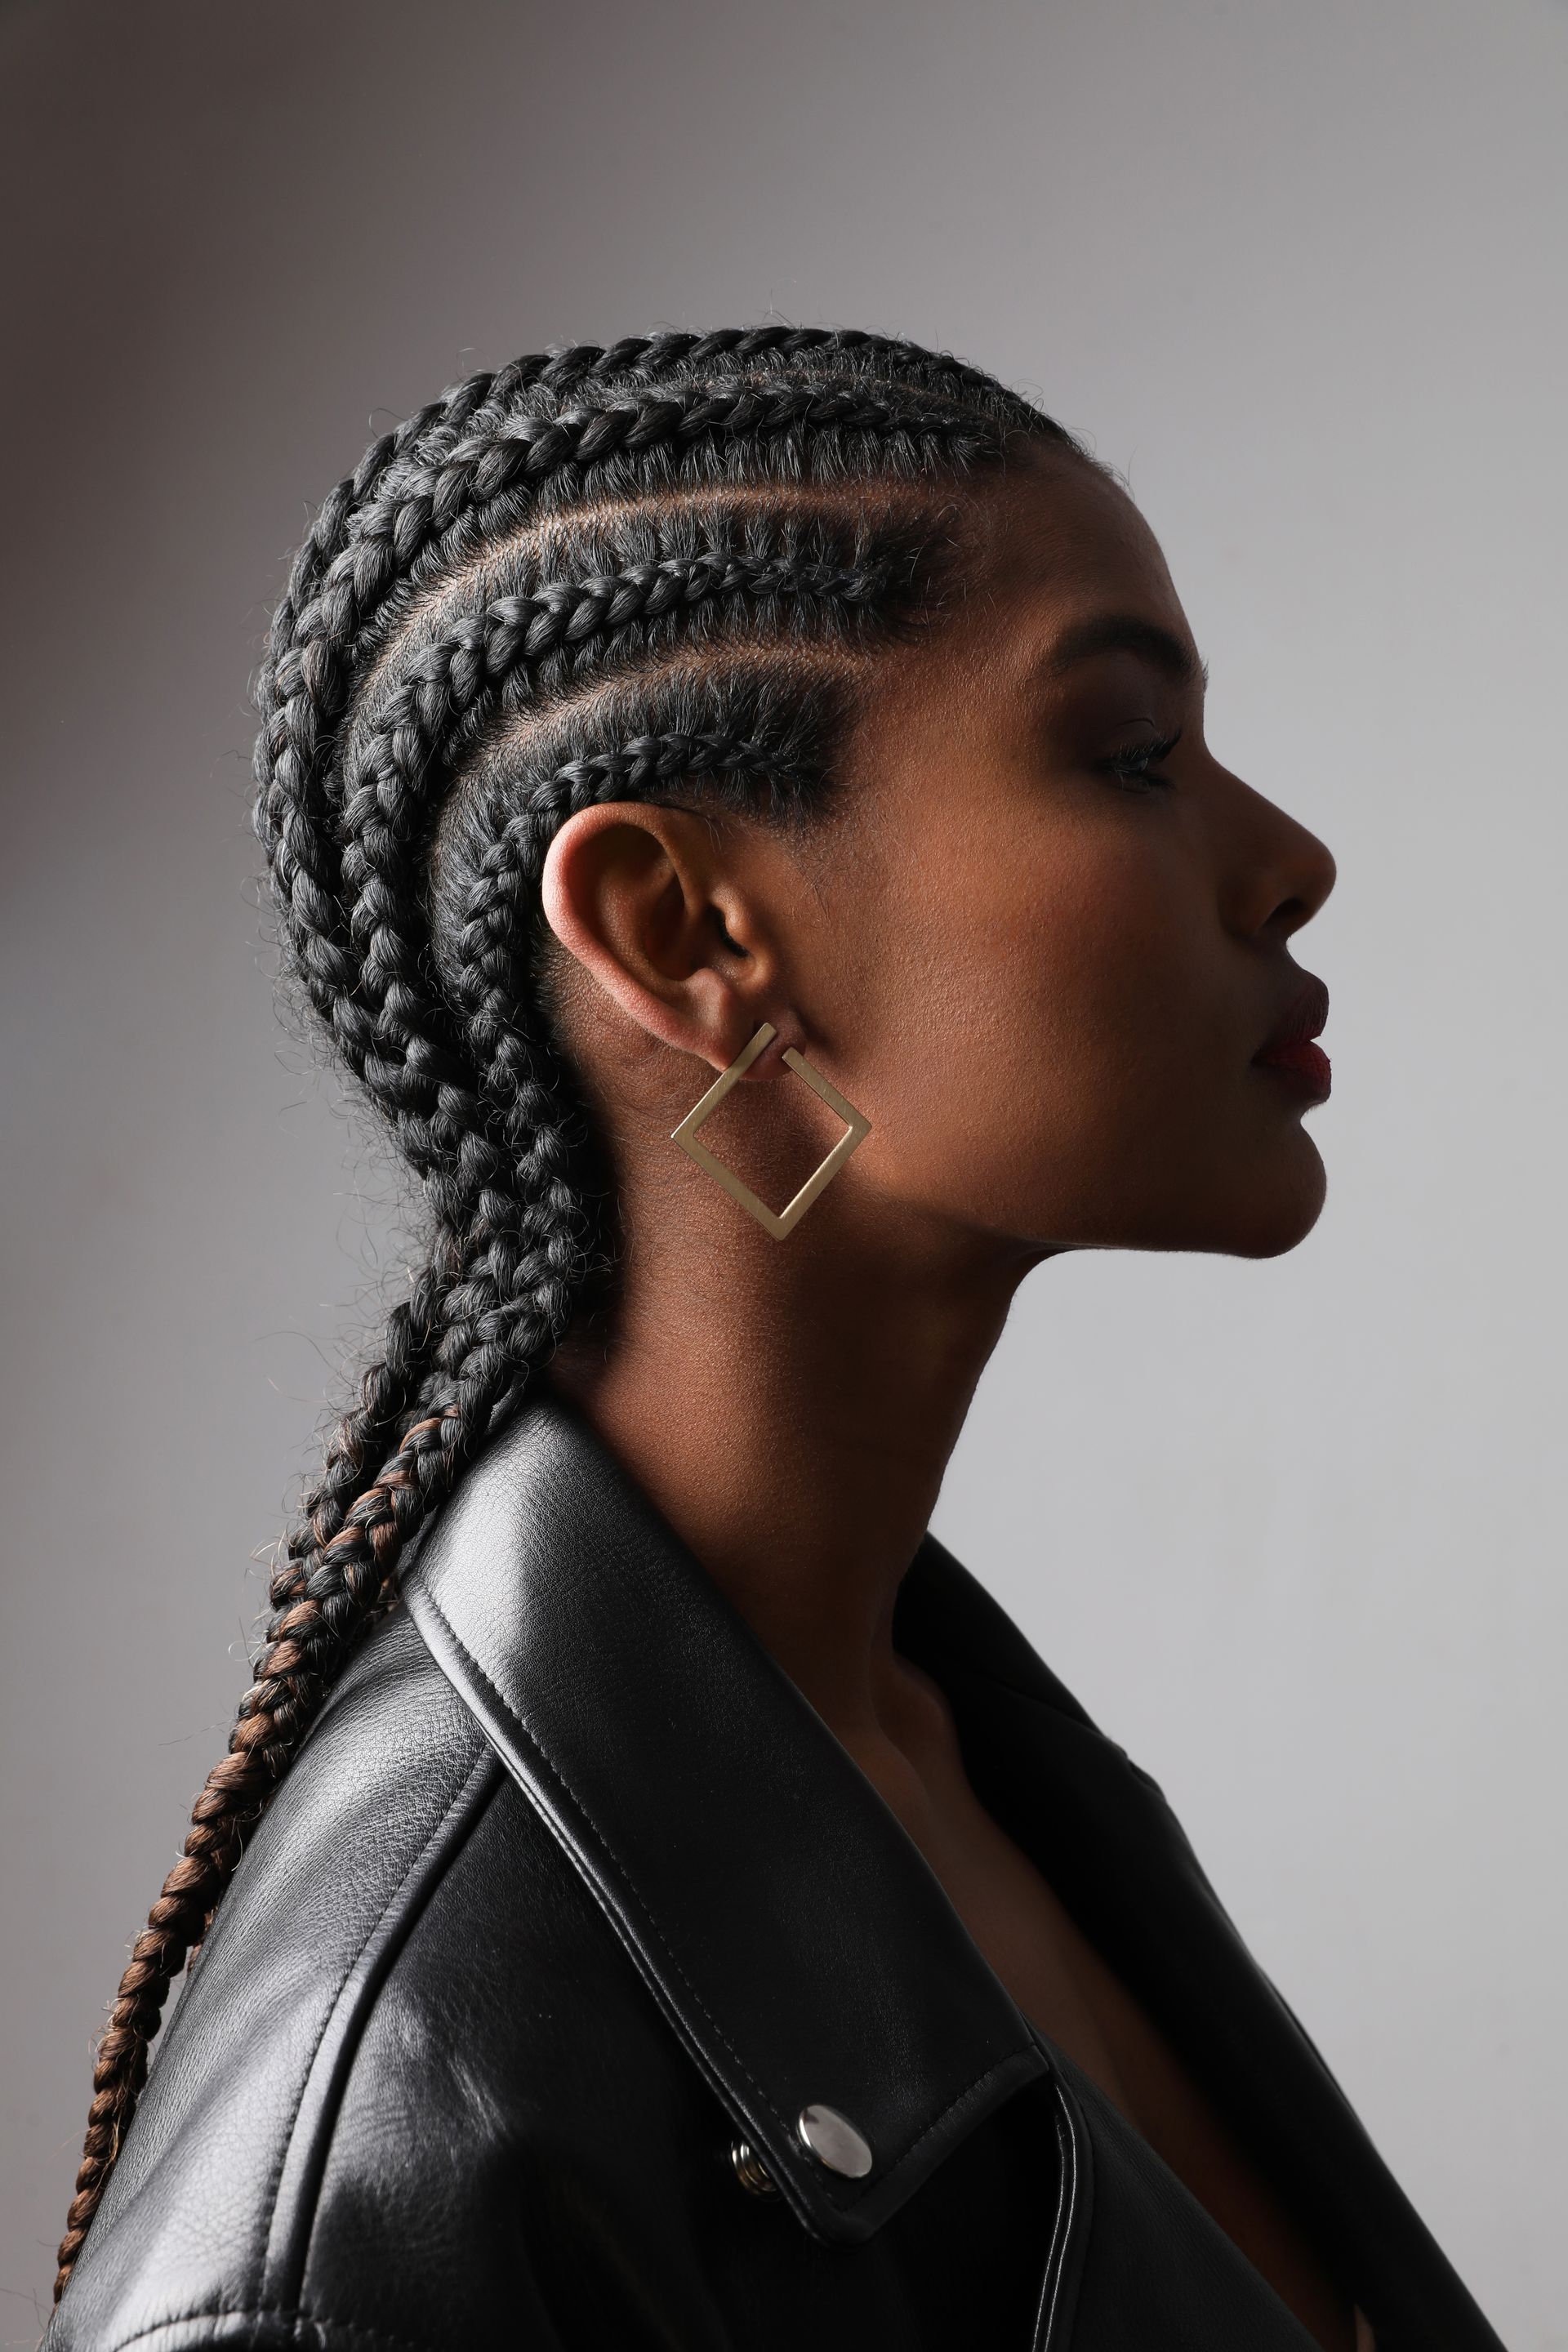 a woman with braids is wearing a leather jacket and earrings